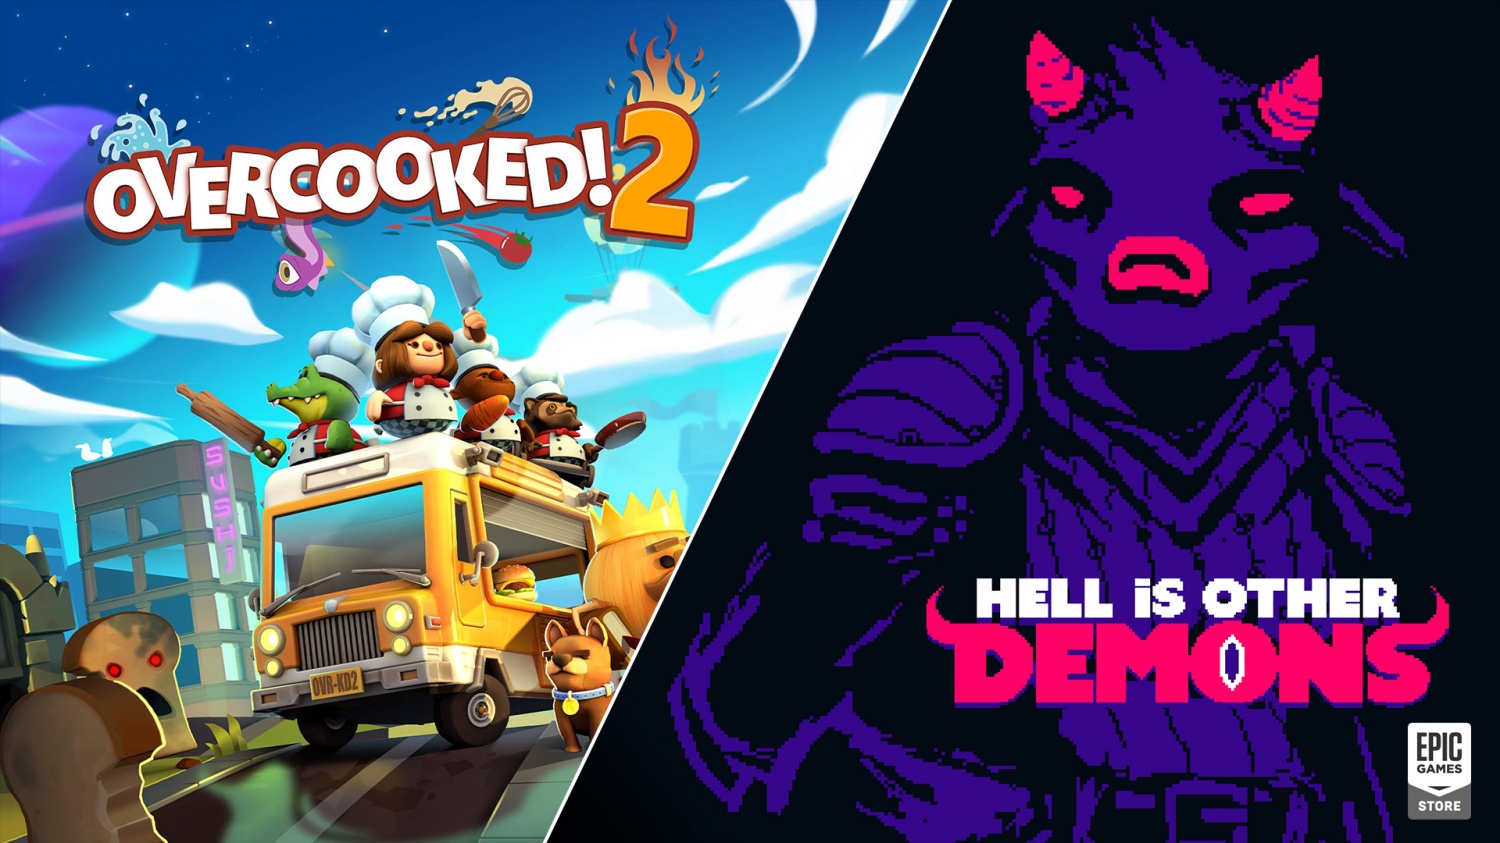 Overcooked 2 and Hell Is Other Demons are both free on Epic Games Store